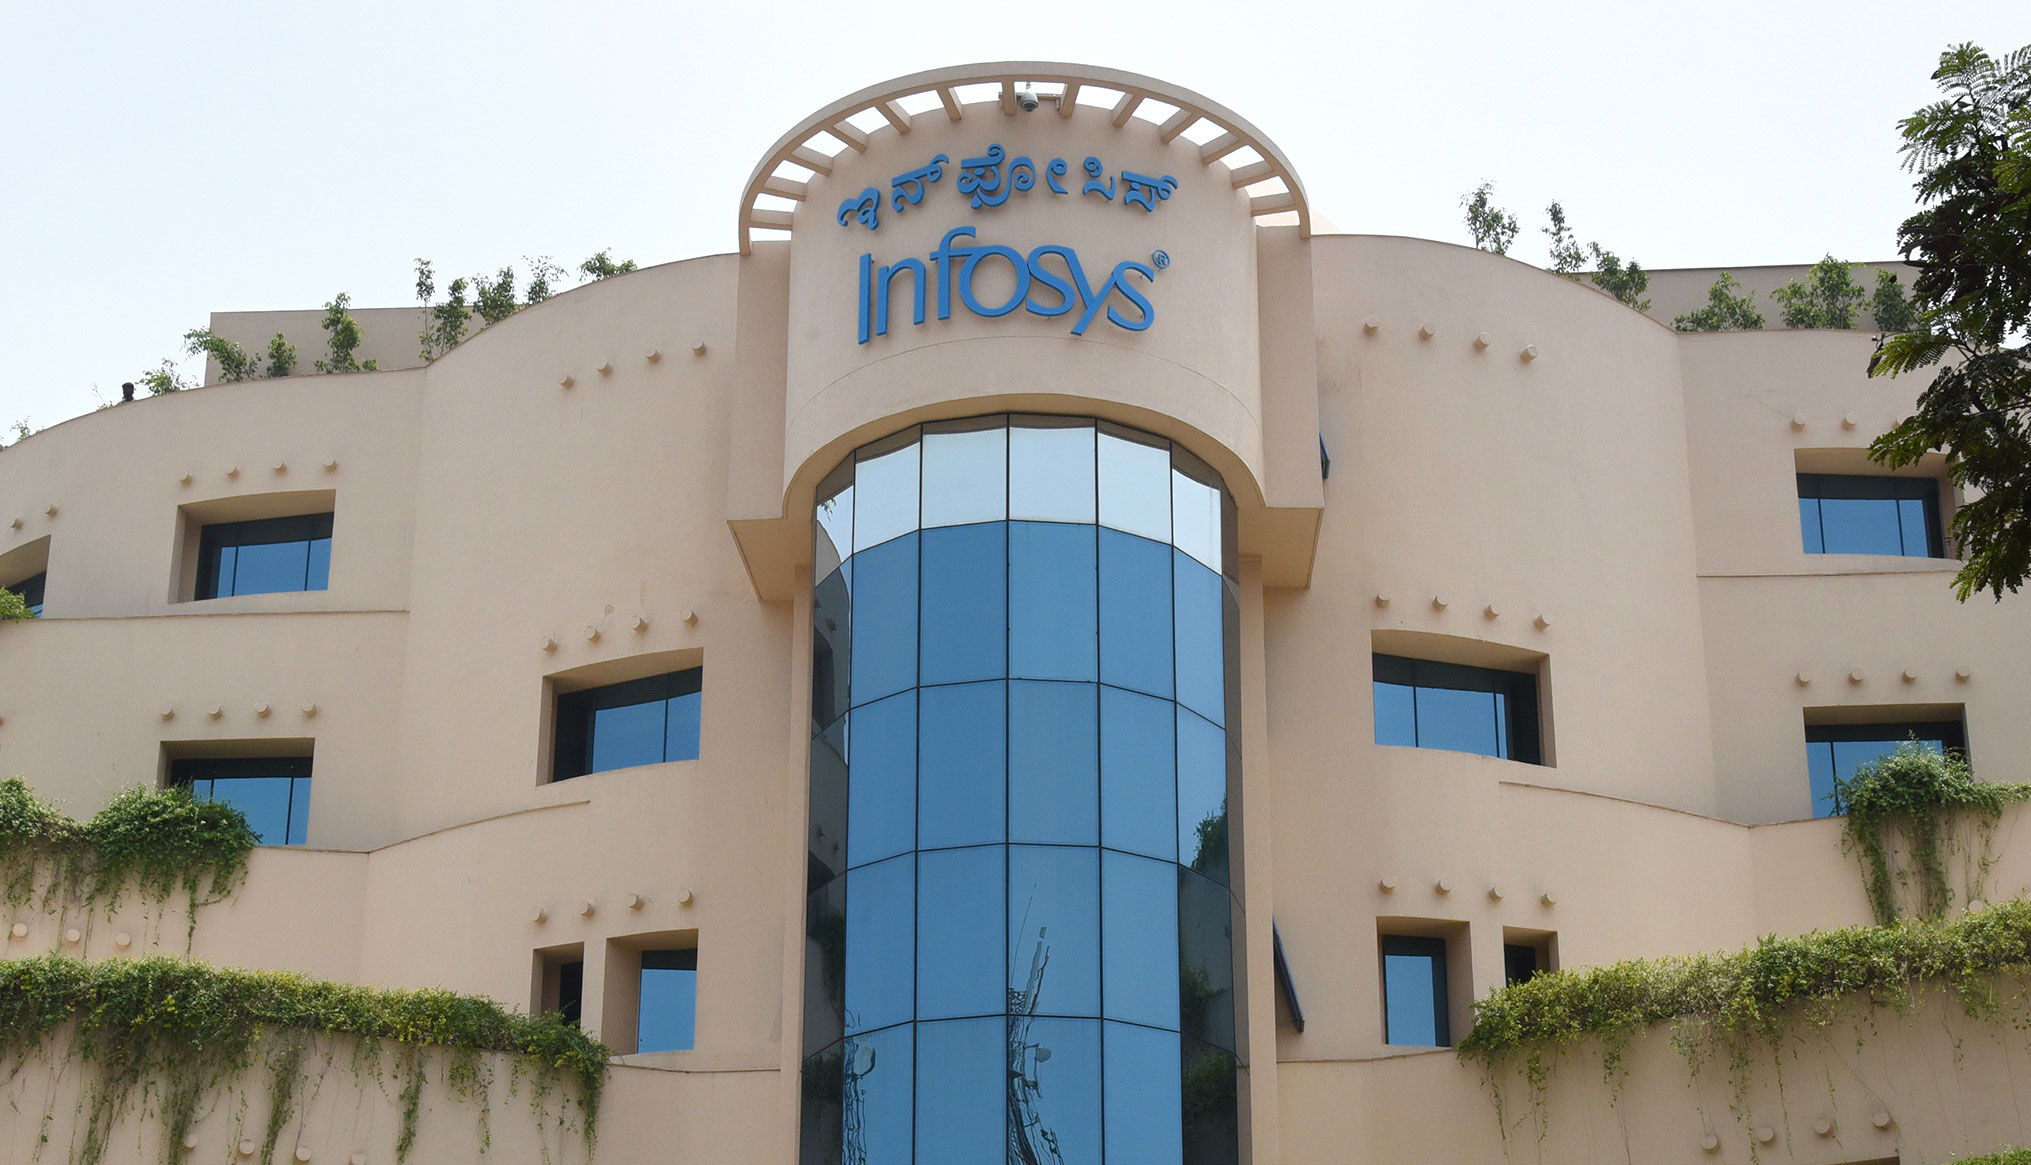 More than a fortnight ago, Infosys had said that an independent investigation found no evidence of financial impropriety or executive misconduct by  Parekh and Roy